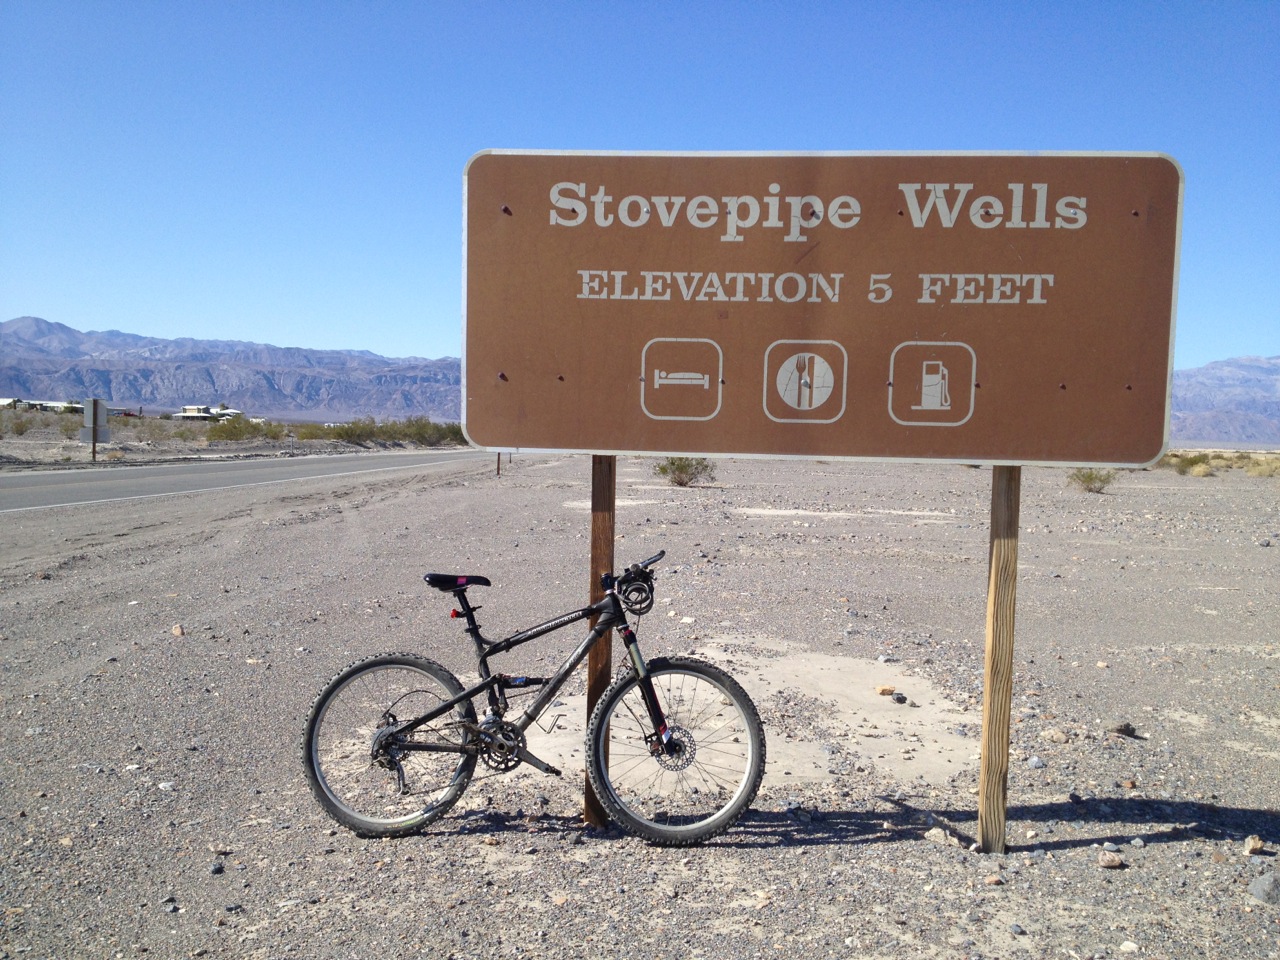 My trusty bicycle resting against the sign for Stovepipe Wells after the ride.